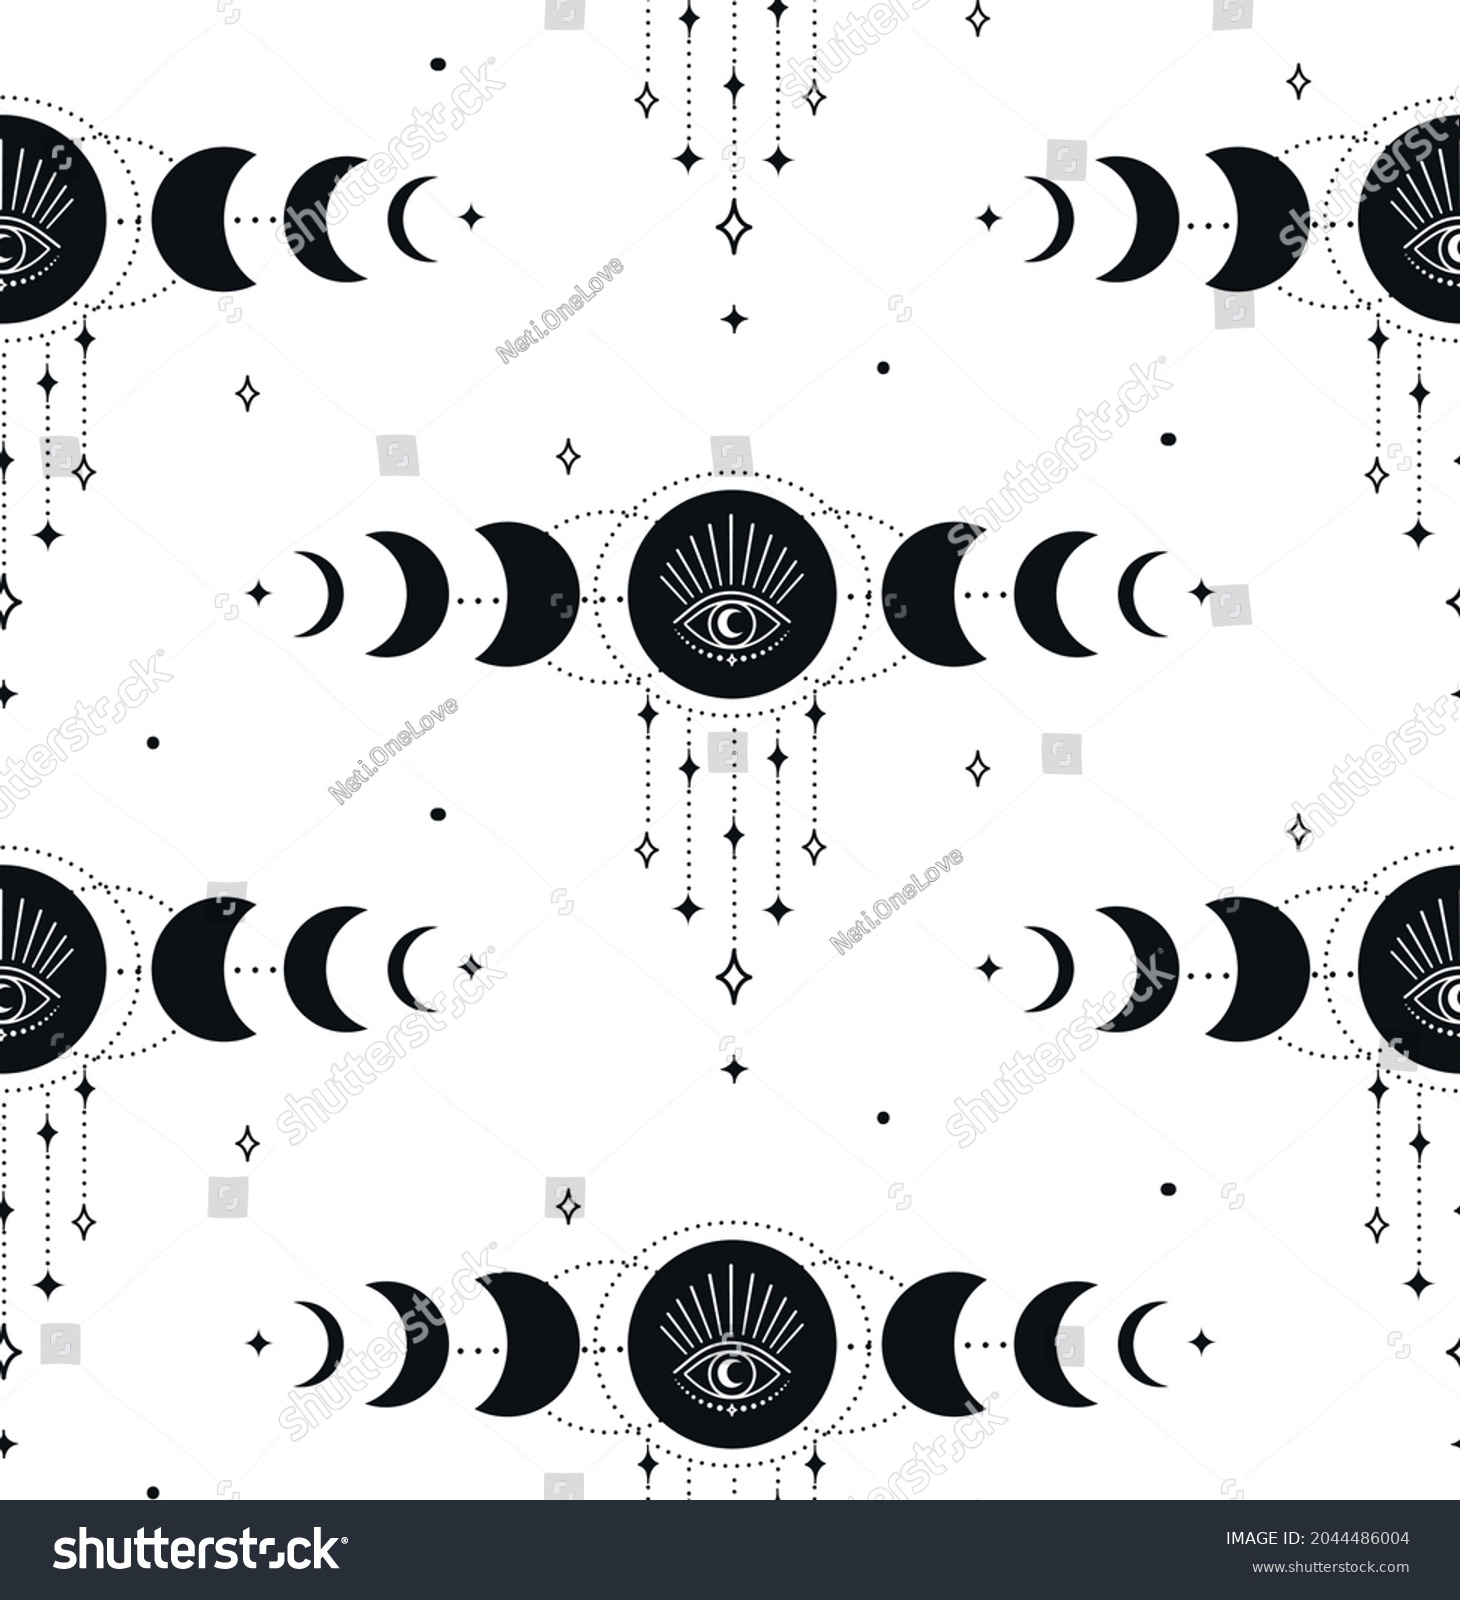 SVG of Abstract Background Seamless Pattern with Moon Phases, Crescents, Stars, Eyes, circles, dots. Mystic Design, Vector Illustration for wrapping tissue paper. svg